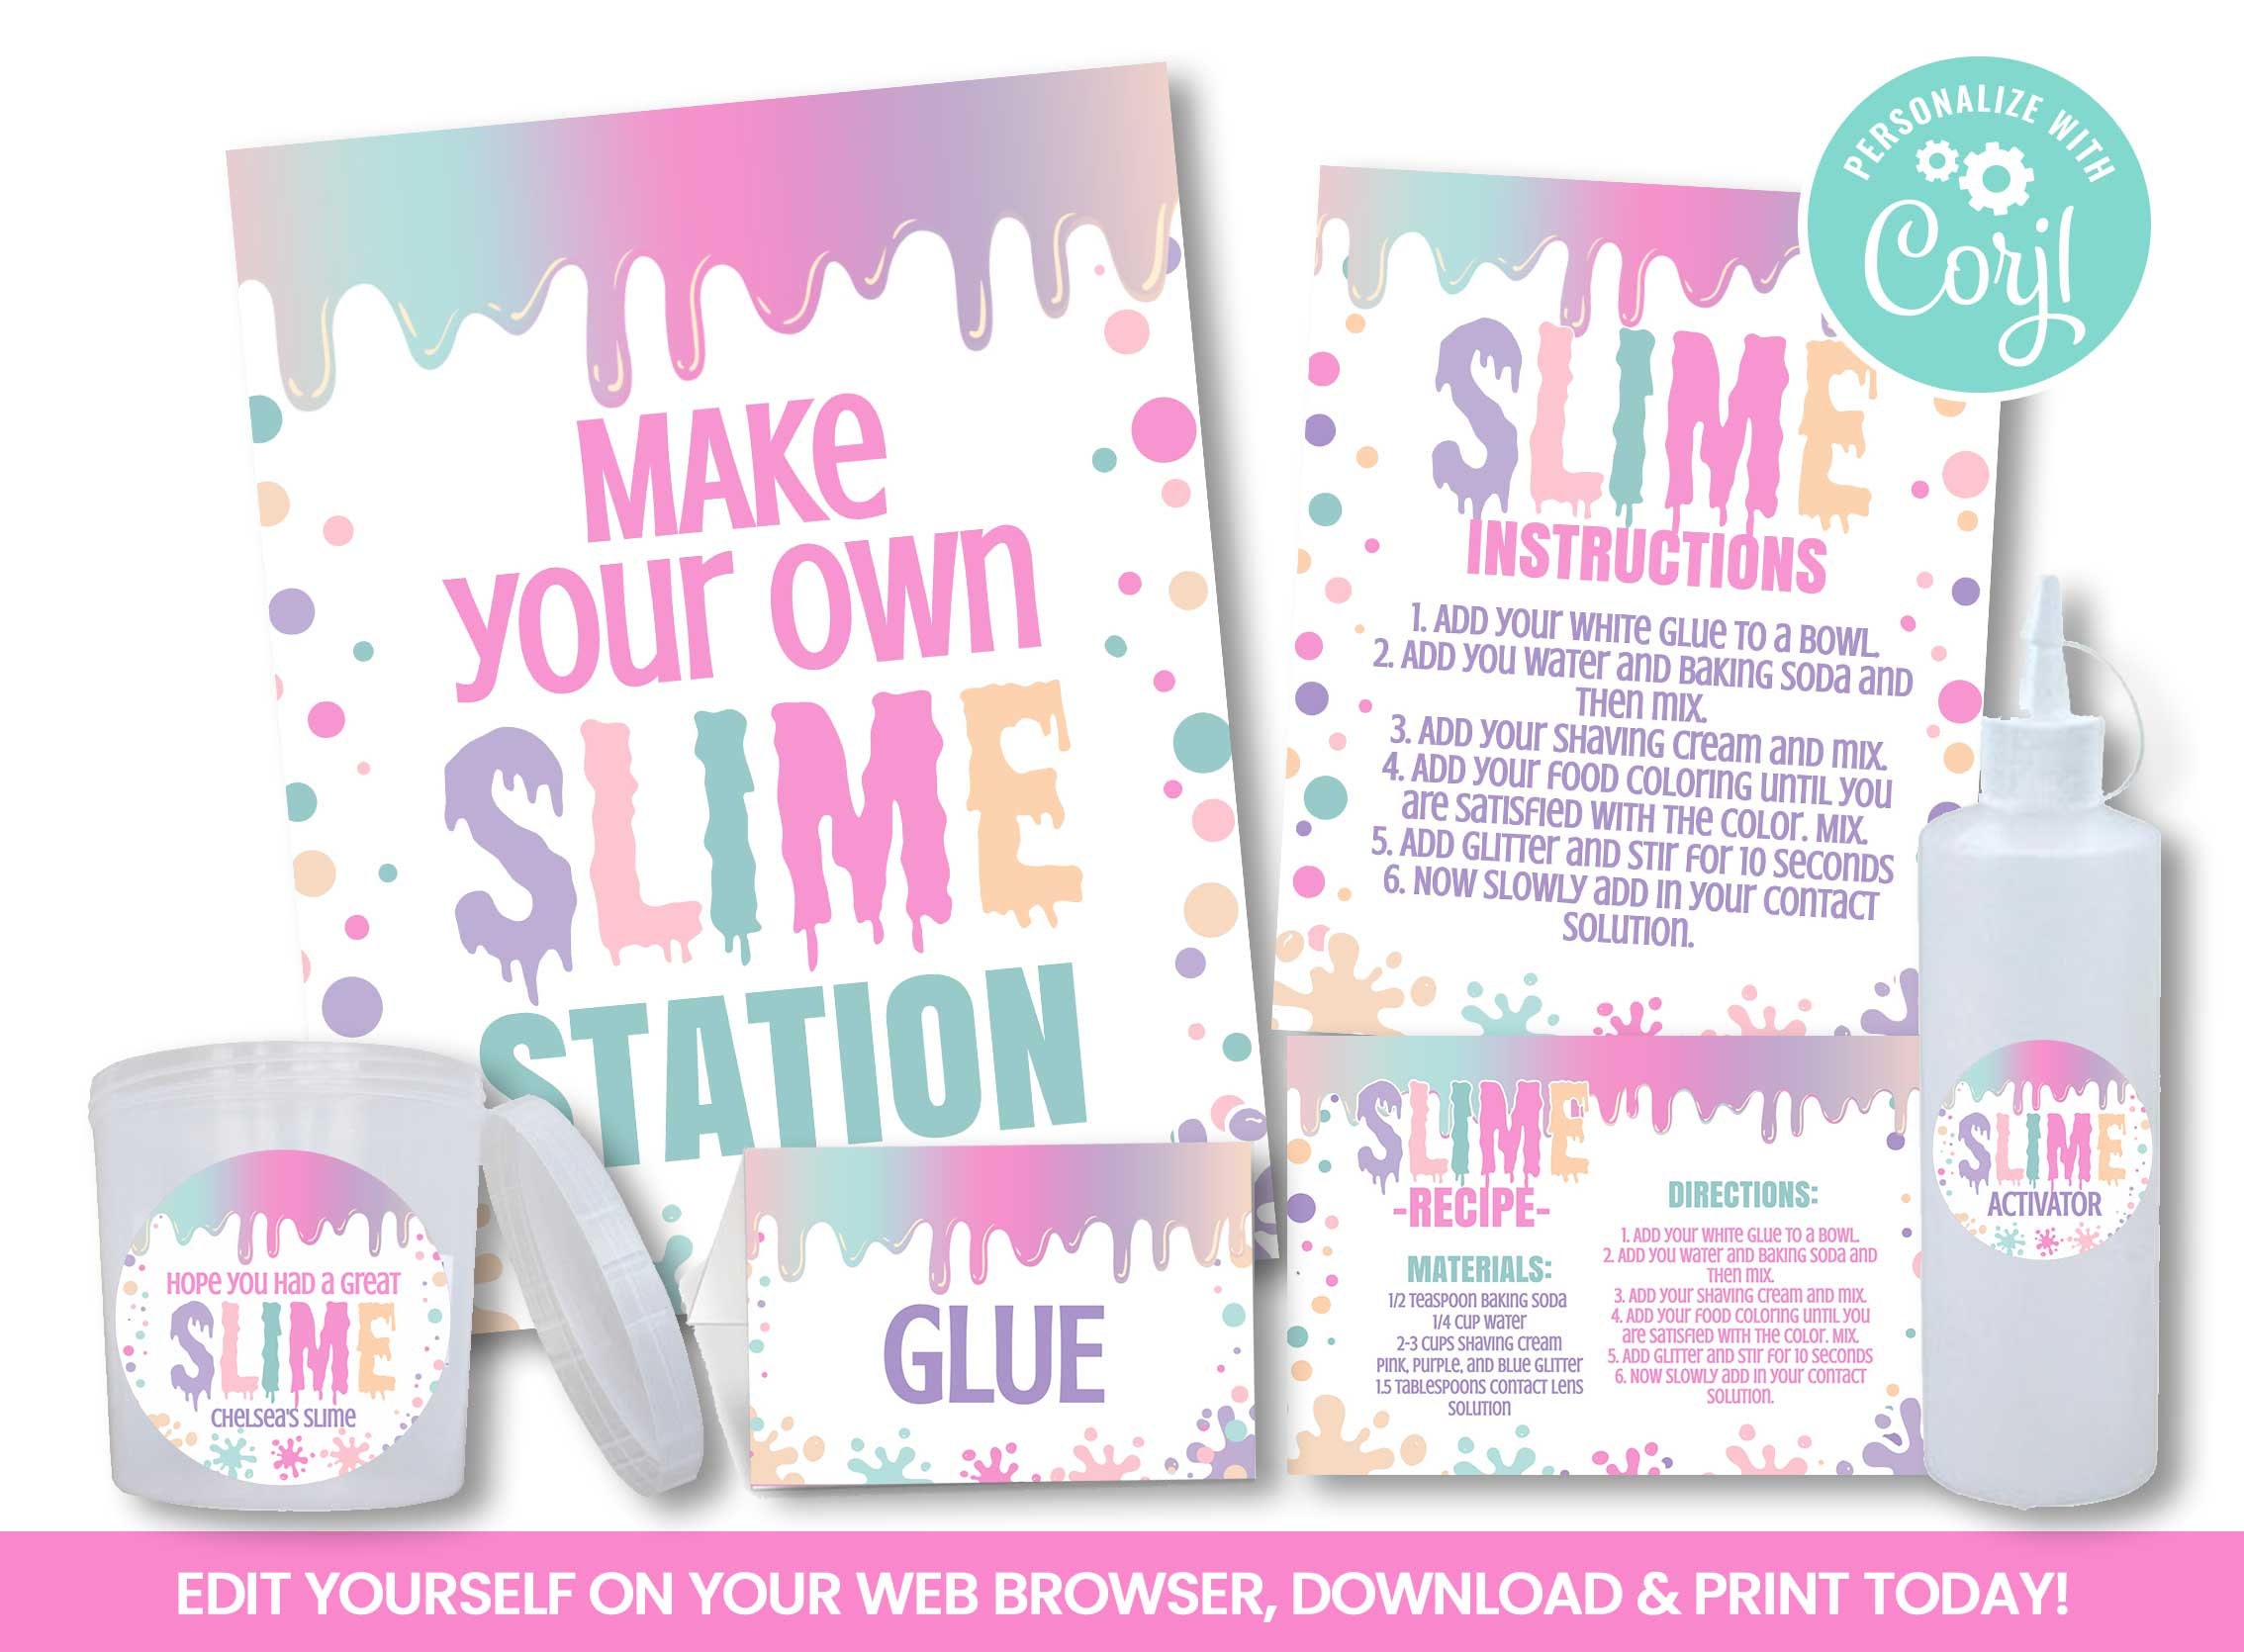 Printable Slime Poster With PHOTO, DIY, 24 X 36 Size Backdrop Sign, Slime  Party, Slime Birthday Party, Slime Banner, Slime Party Decorations 